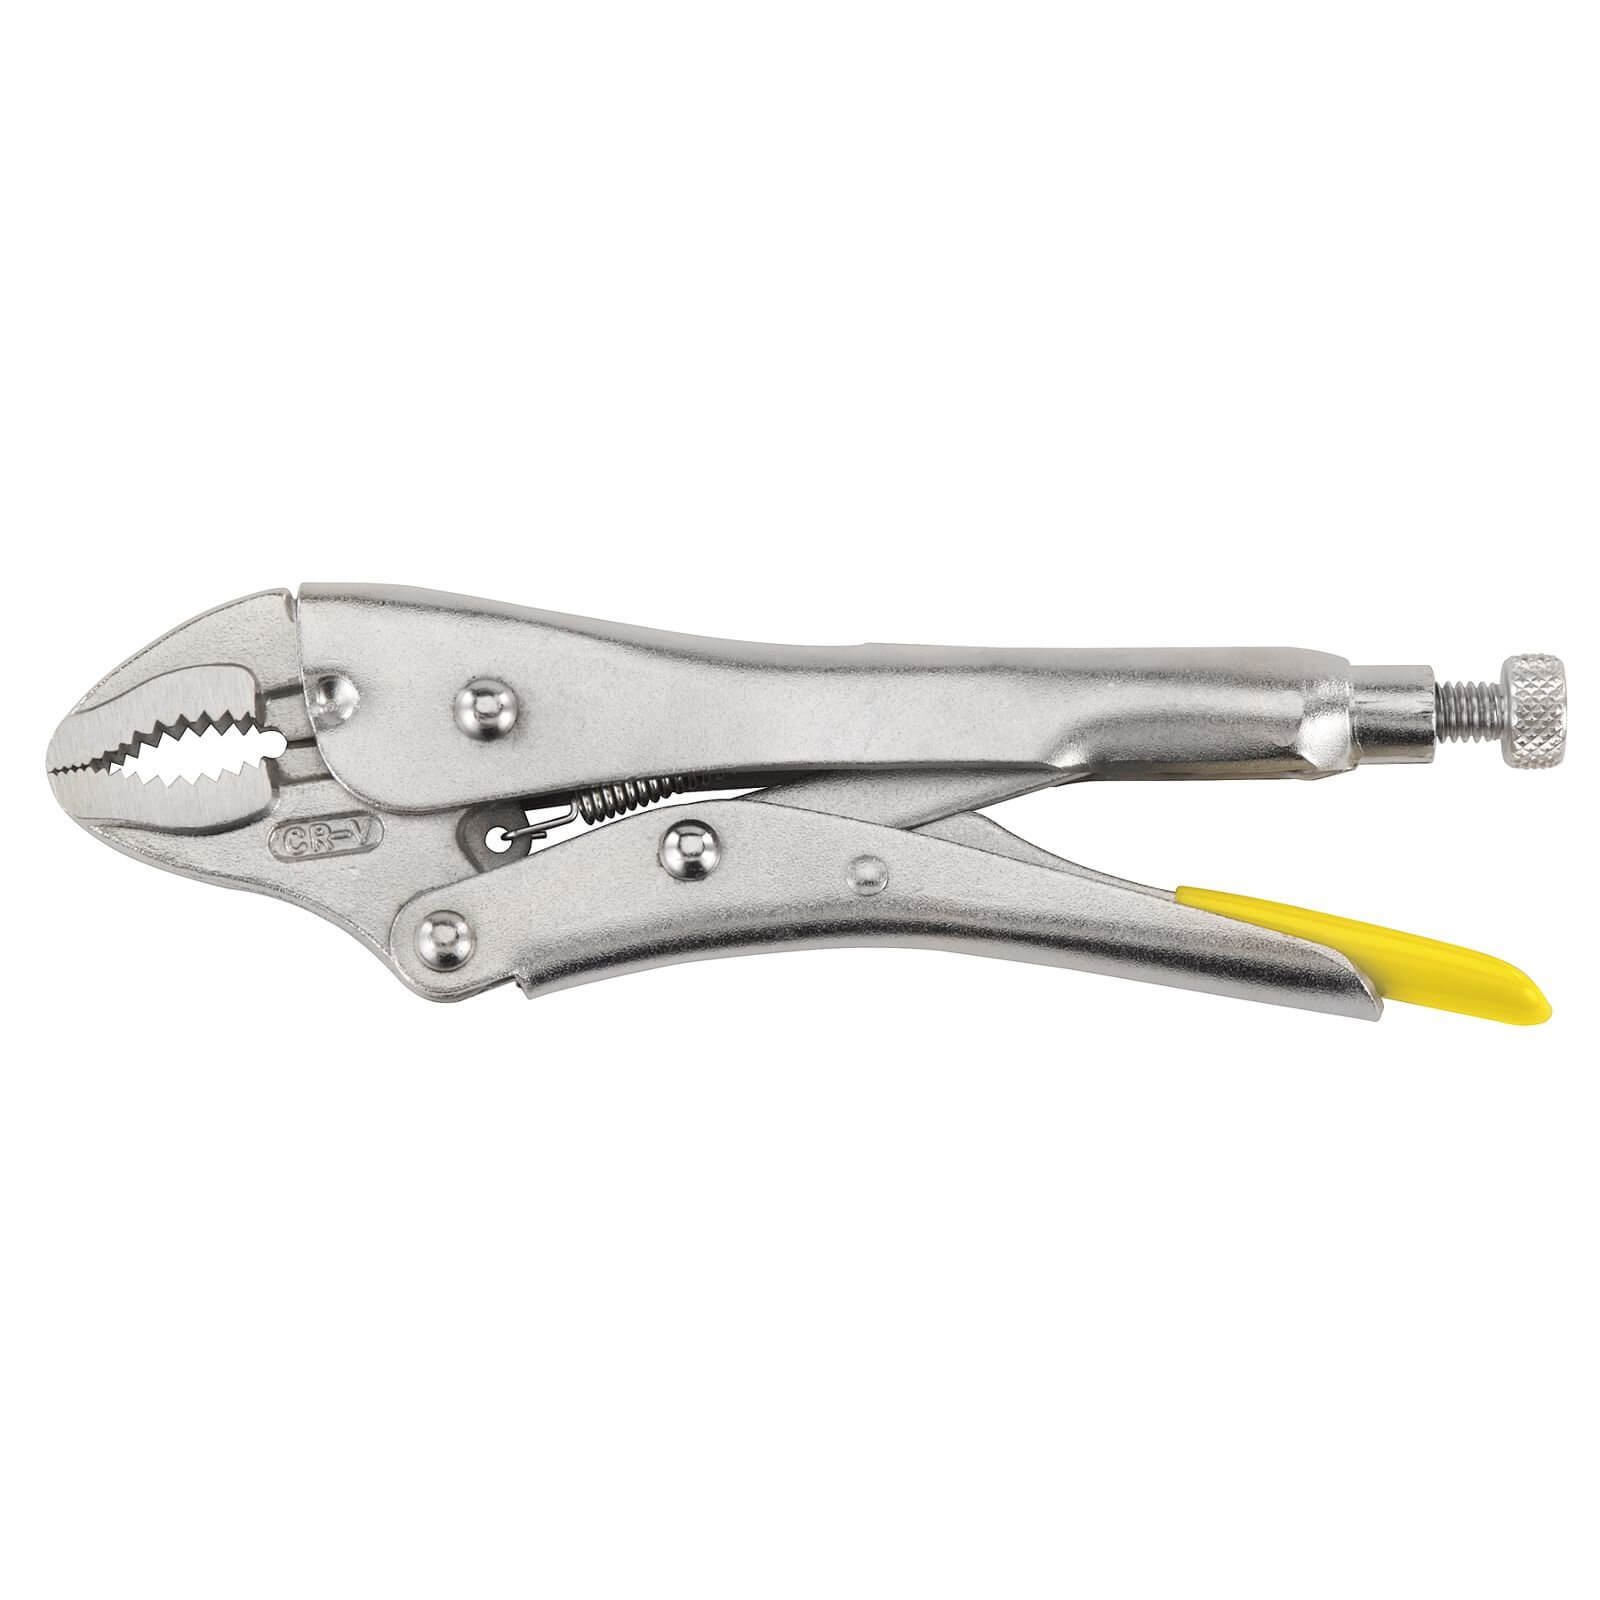 Stanley 185mm Locking Pliers Curved Claw (Mole Grips)